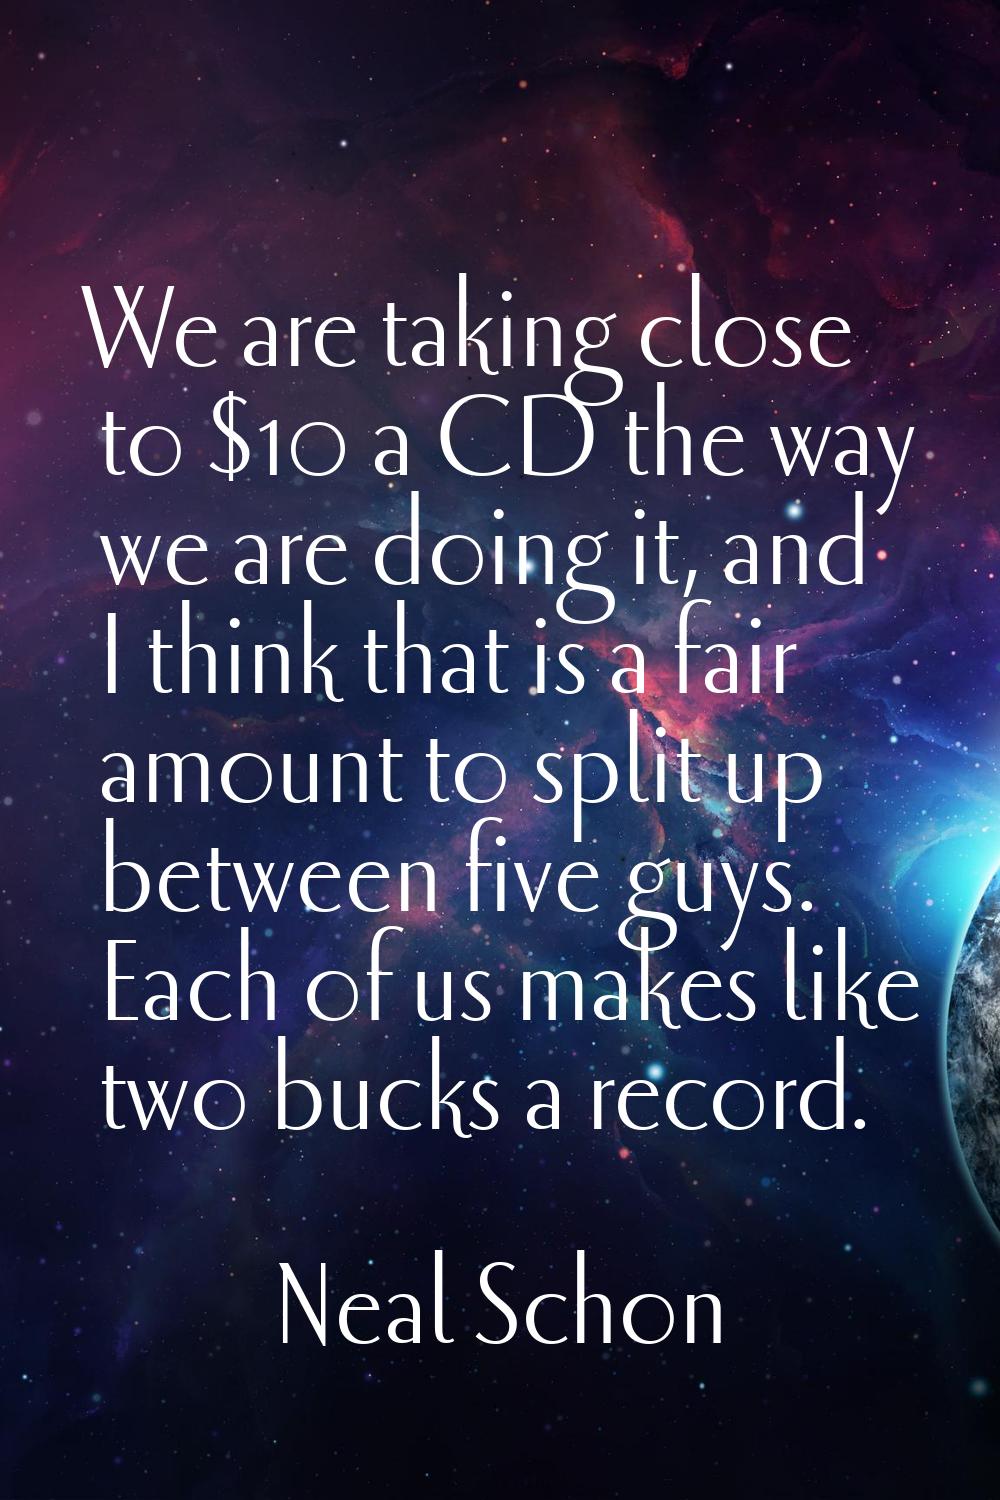 We are taking close to $10 a CD the way we are doing it, and I think that is a fair amount to split